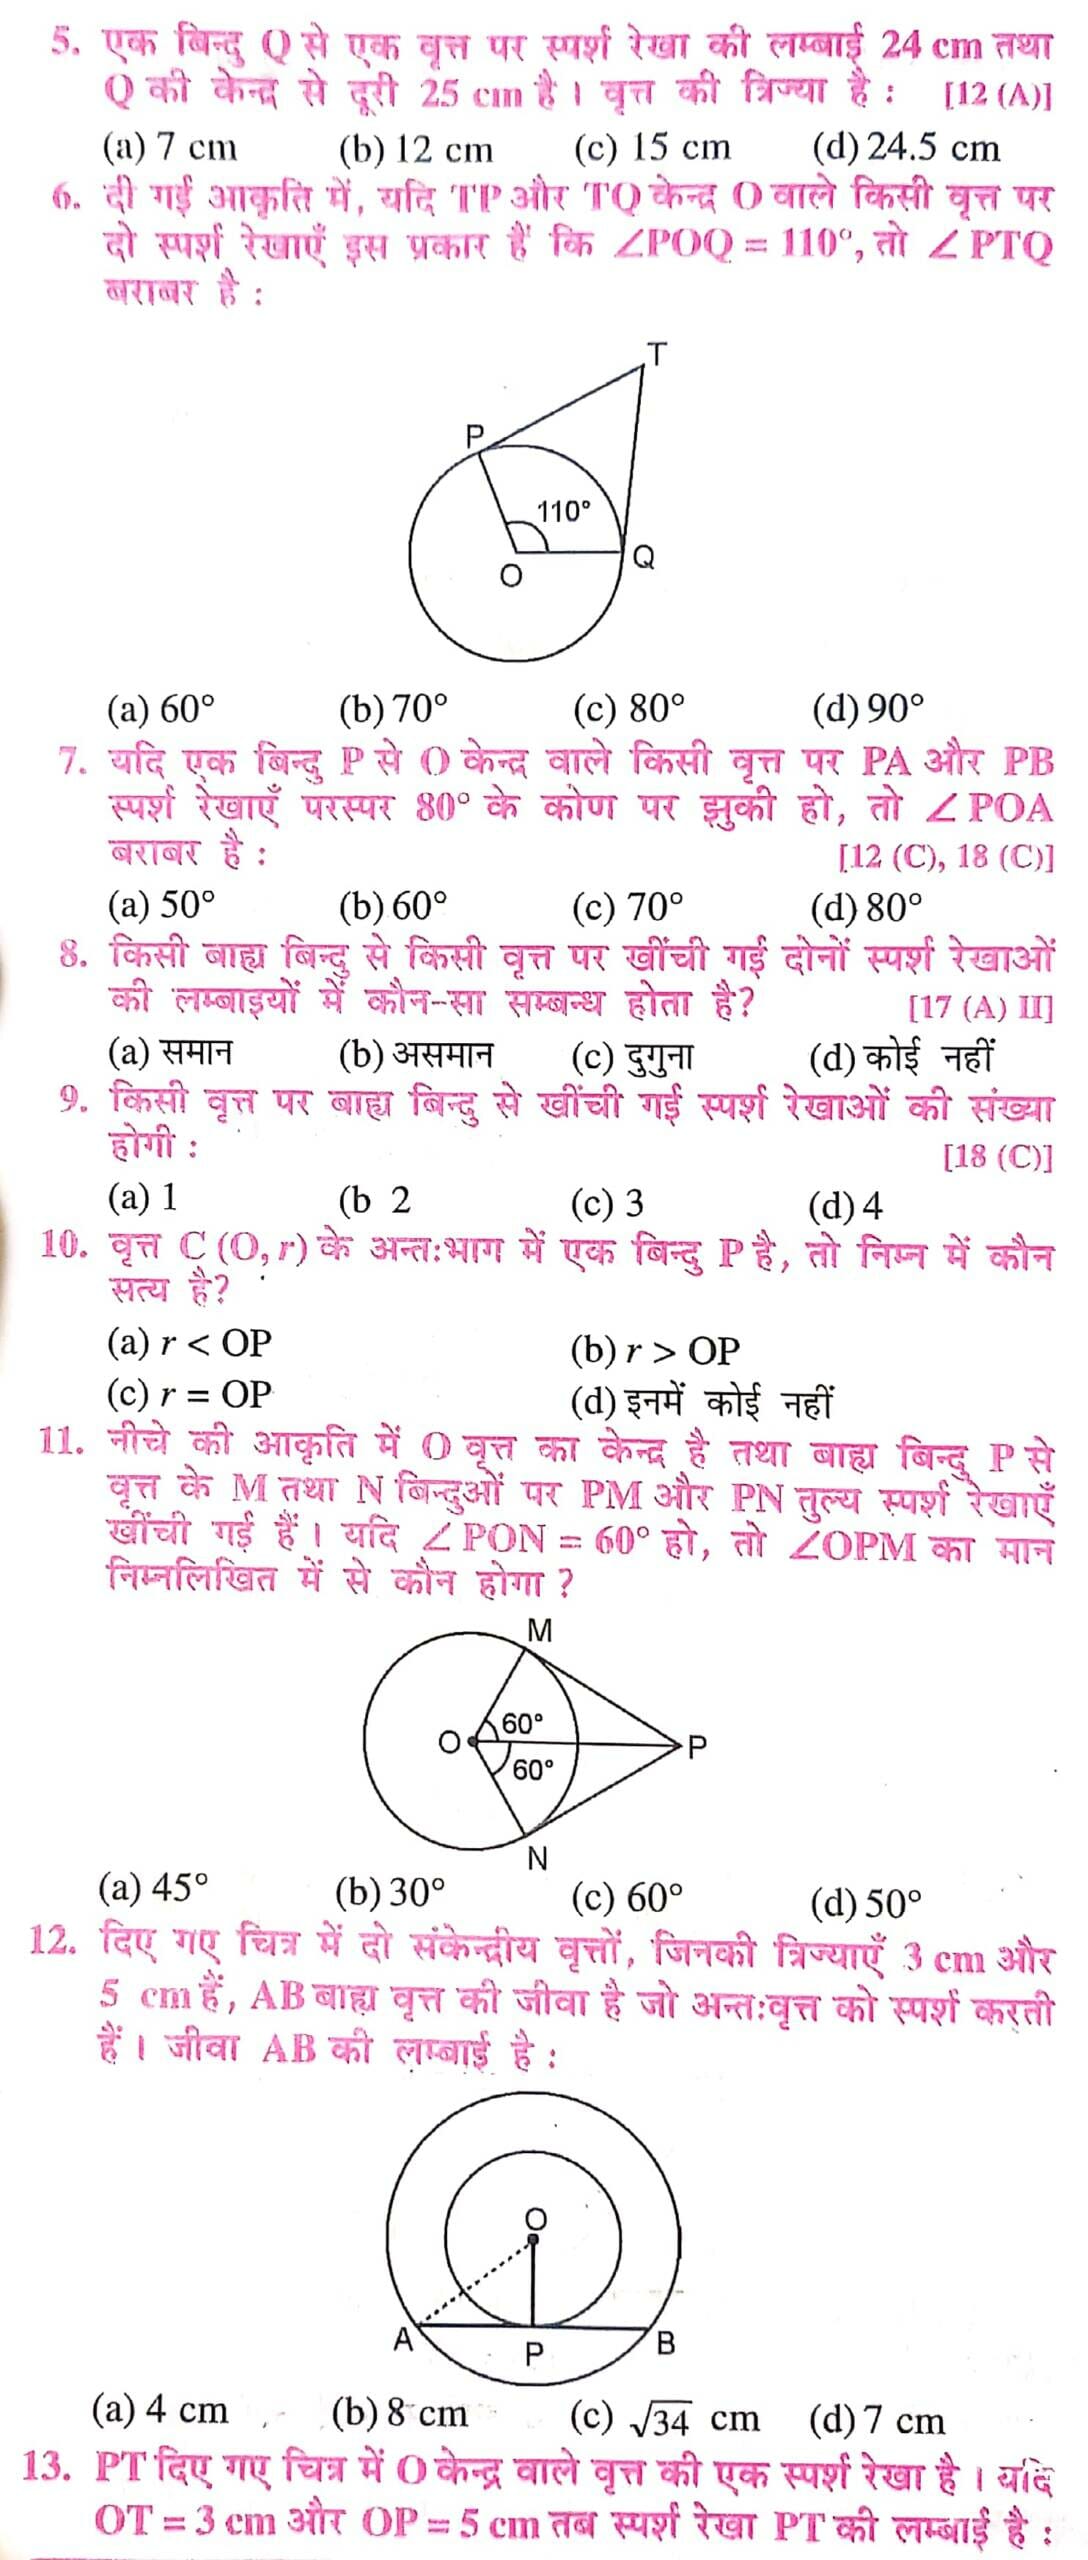 10th class math objective question answer